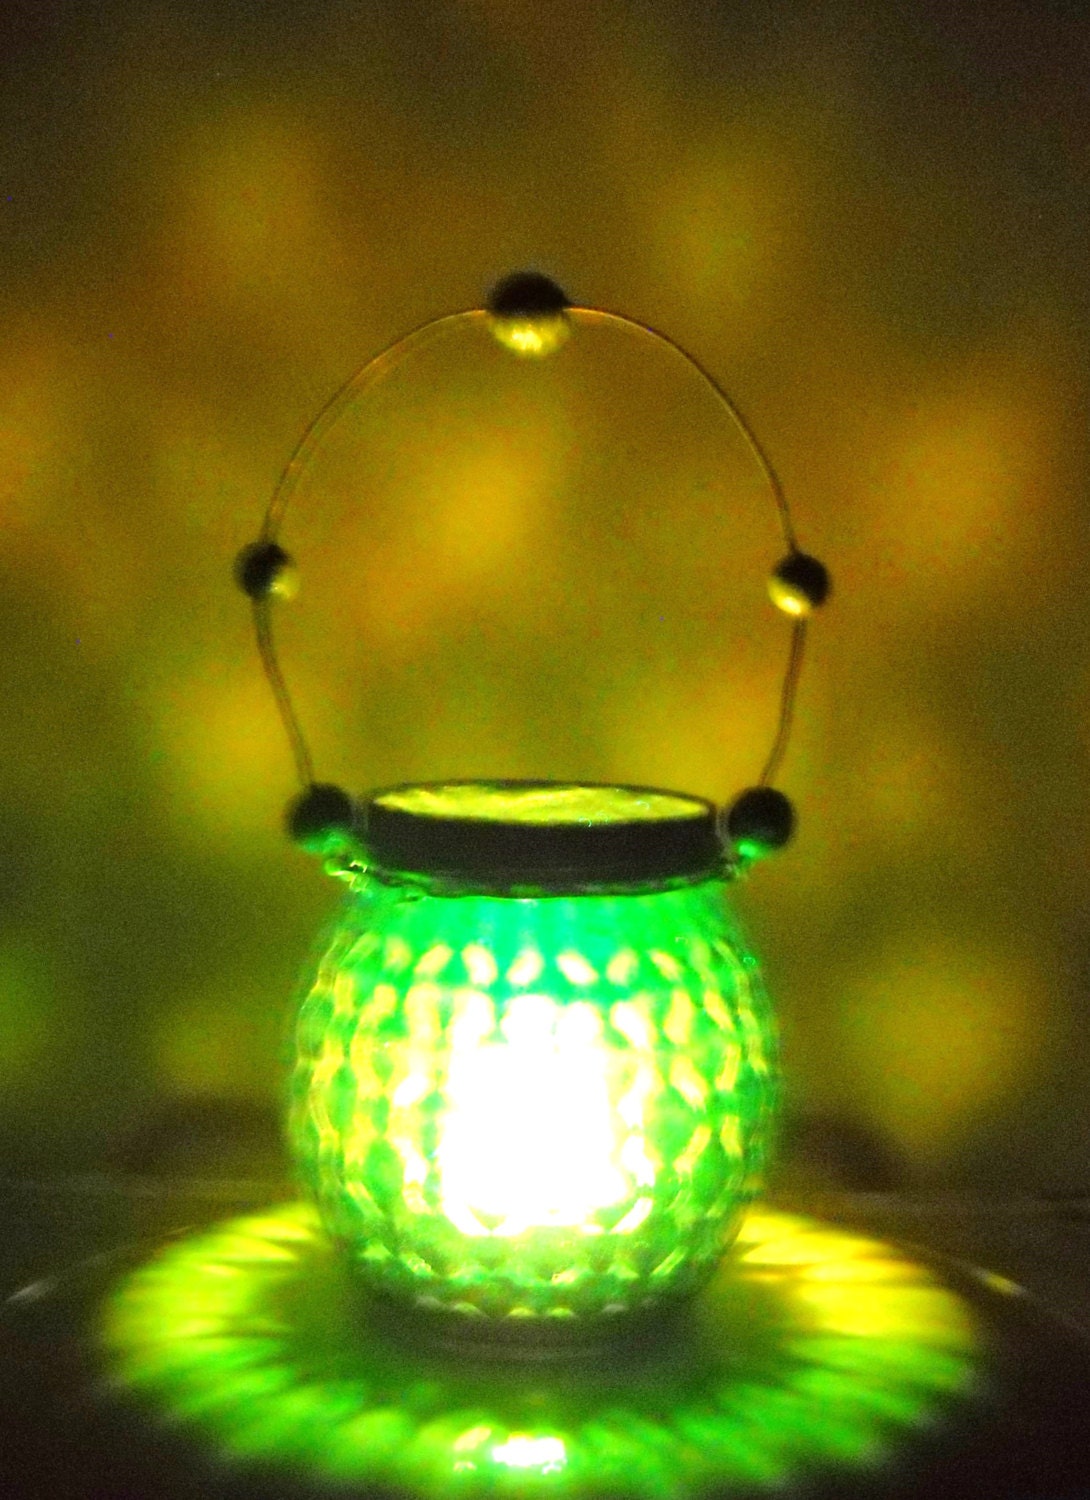 Hanging green lantern  - beaded wire handle - made from a pretty jelly jar - for LED candle - ChickenJungle